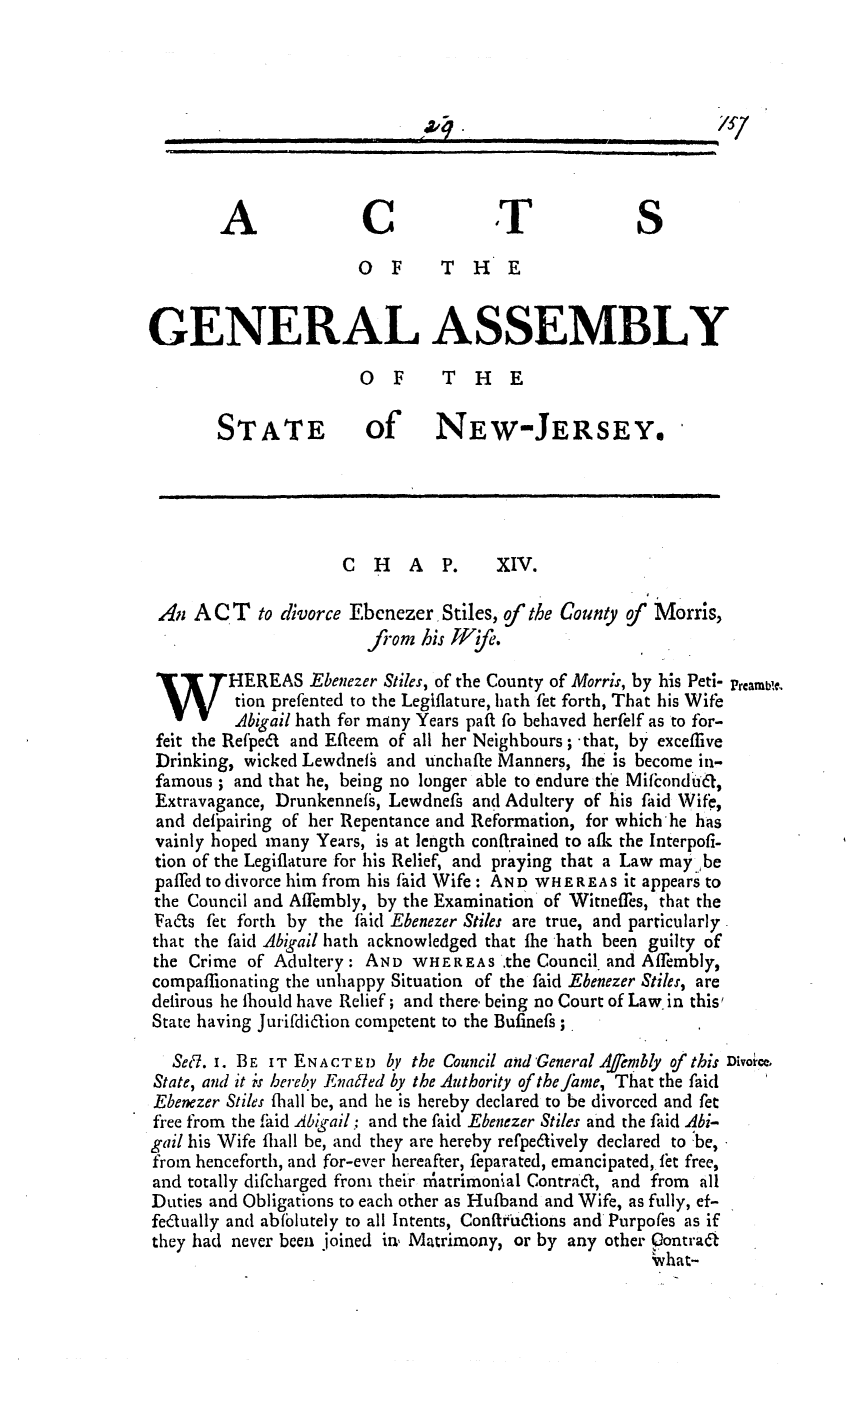 handle is hein.ssl/ssnj0221 and id is 1 raw text is: A               C              T              S
OF       THE
GENERAL ASSEMBLY
OF       THE
STATE            of NEW-JERSEY,
C  H   A   P.    XIV.
An A C T to divorce Ebenezer Stiles, of the County of  Morris,
fiom his Wyf,,.
HEREAS Ebenezer Stiles, of the County of Morris, by his Peti- prcamb1.
tion prefented to the Legiflature, hath fet forth, That his Wife
Abigail hath for many Years paft fo behaved herfelf as to for-
feit the Refpea and Efteem of all her Neighbours; -that, by exceflive
Drinking, wicked Lewdnef  and Unchafte Manners, fie is become in-
famous ; and that he, being no longer able to endure the Mifiondua,
Extravagance, Drunkennefs, Lewdnefs and Adultery of his faid Wife,
and deifairing of her Repentance and Reformation, for which'he has
vainly hoped many Years, is at length conftrained to afi the Interpofi-
tion of the Legiflature for his Relief, and praying that a Law may.,be
paffed to divorce him from his fiid Wife : AND WHEREAS it appears to
the Council and Affembly, by the Examination of Witneffes, that the
Fa~ls fet forth by the faid Ebenezer Stiles are true, and particularly
that the faid Abigail hath acknowledged that fhe hath been guilty of
the Crime of Adultery: AND WHEREAS the Council, and Affembly,
compaffionating the unhappy Situation of the faid Ebenezer Stiles, are
delirous he lhould have Relief; and there. being no Court of Law in this'
State having Juriifdidion competent to the Bufinefs;
Sec7. i. BE IT ENACTED by the Council and 'General Afernbly of this Divorice.
State, and it is hereby Enaled by the Authority of theJame, That the faid
Ebenezer Stiles fihall be, and he is hereby declared to be divorced and fet
free from the faid Abigail; and the faid Ebenezer Stiles and the faid Abi-
gail his Wife fliall be, and they are hereby refpedively declared to 'be,
from henceforth, and for-ever hereafter, feparated, emancipated, fit free,
and totally difcharged from their rnatrimonlal Contraa, and from all
Duties and Obligations to each other as Huiband and Wife, as fully, ef-
fedtually and abfblutely to all Intents, Conftrt6iaions and Purpofes as if
they had never been joined in, Matrimony, or by any other Contraa
vhat-

I   I   I II       I|                                                                                        -          i                                                 illlli          II       I       i         i           In_        _    .
4 1        -                                          li                                      I   HI  I                                    I                     I               II  B               I                          I           I    I

17

v


